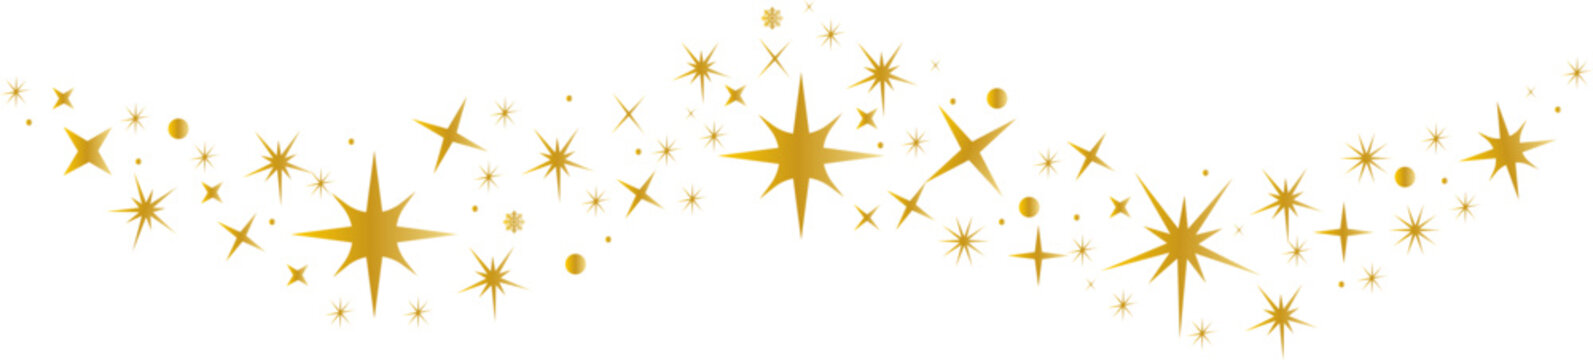 Stars and sparkles border in wave shape..Golden stars wave vector.Christmas decoration.